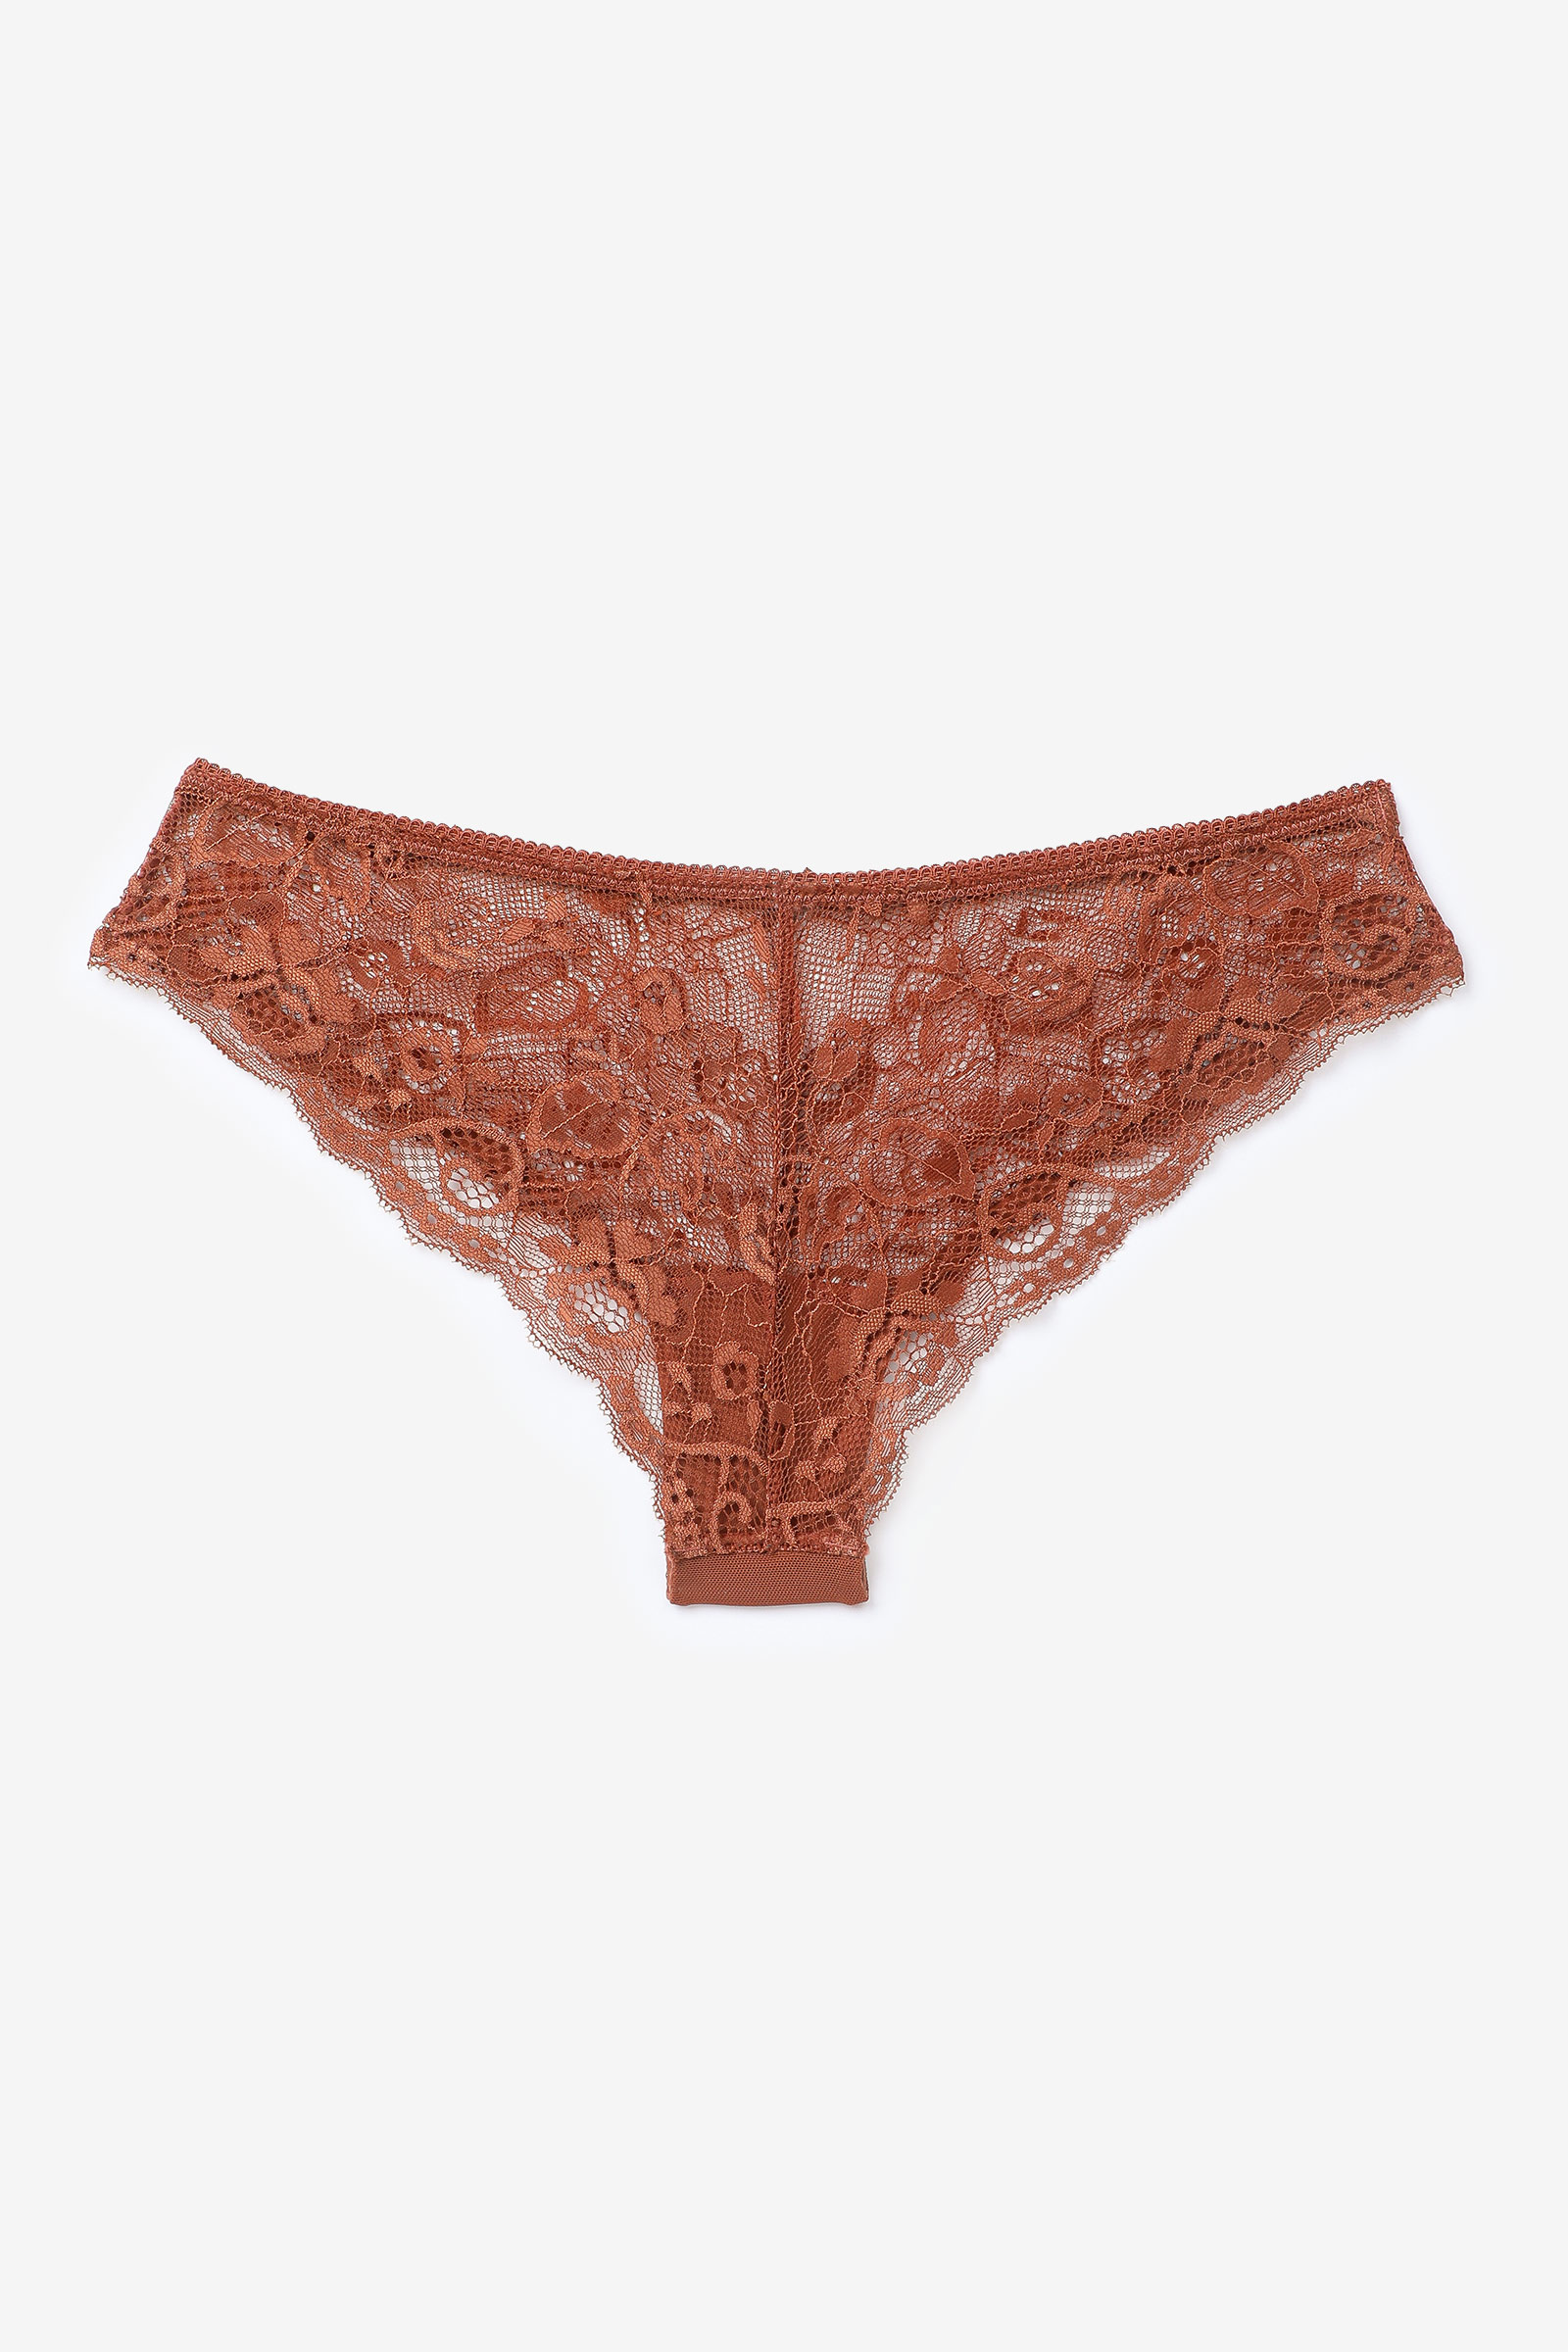 All Lace Cheeky Panty